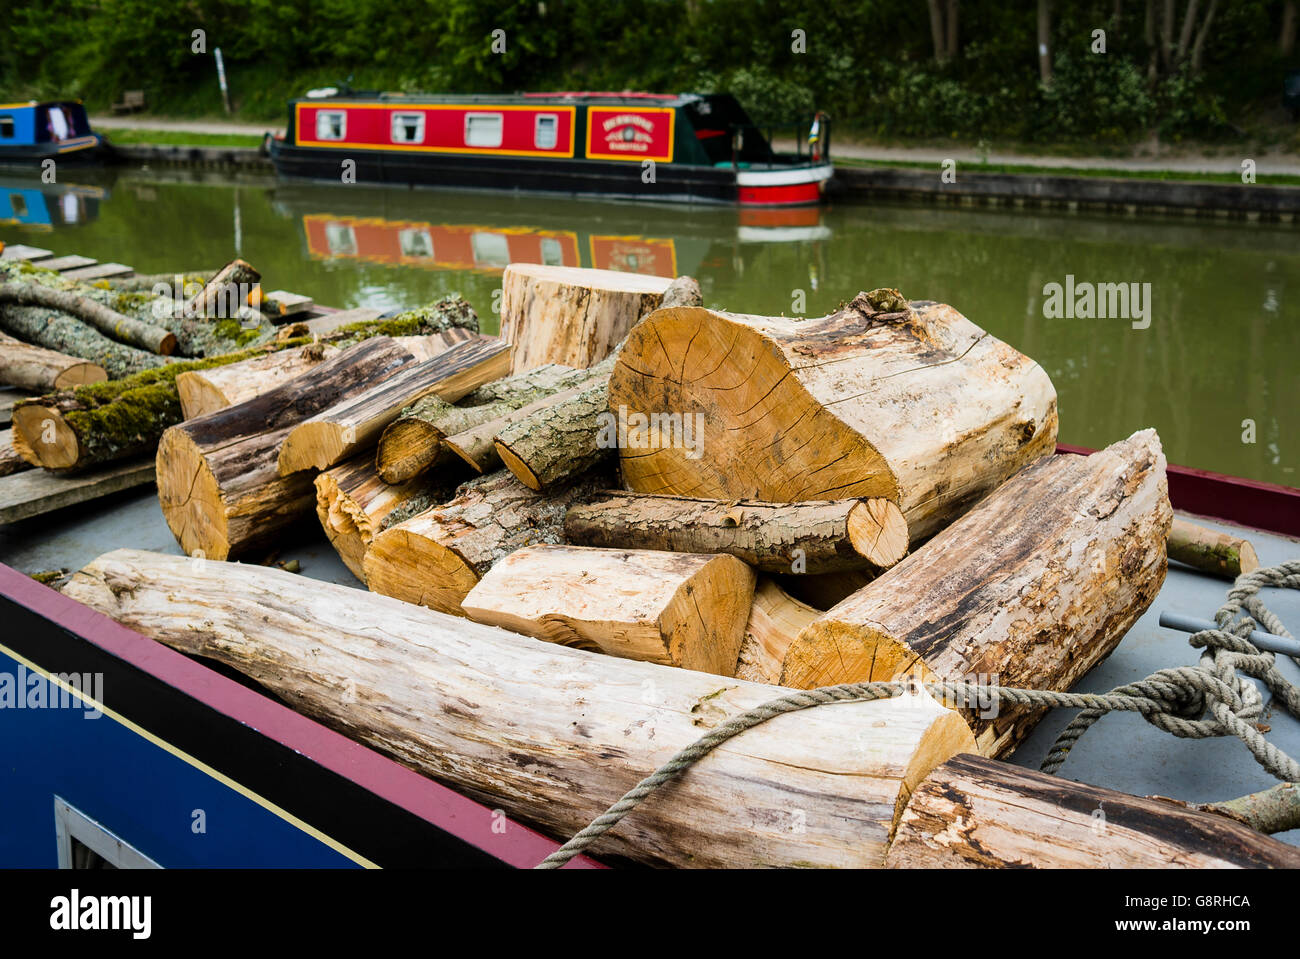 Sawn logs of wood on the roof of a narrow canal house boat Stock Photo